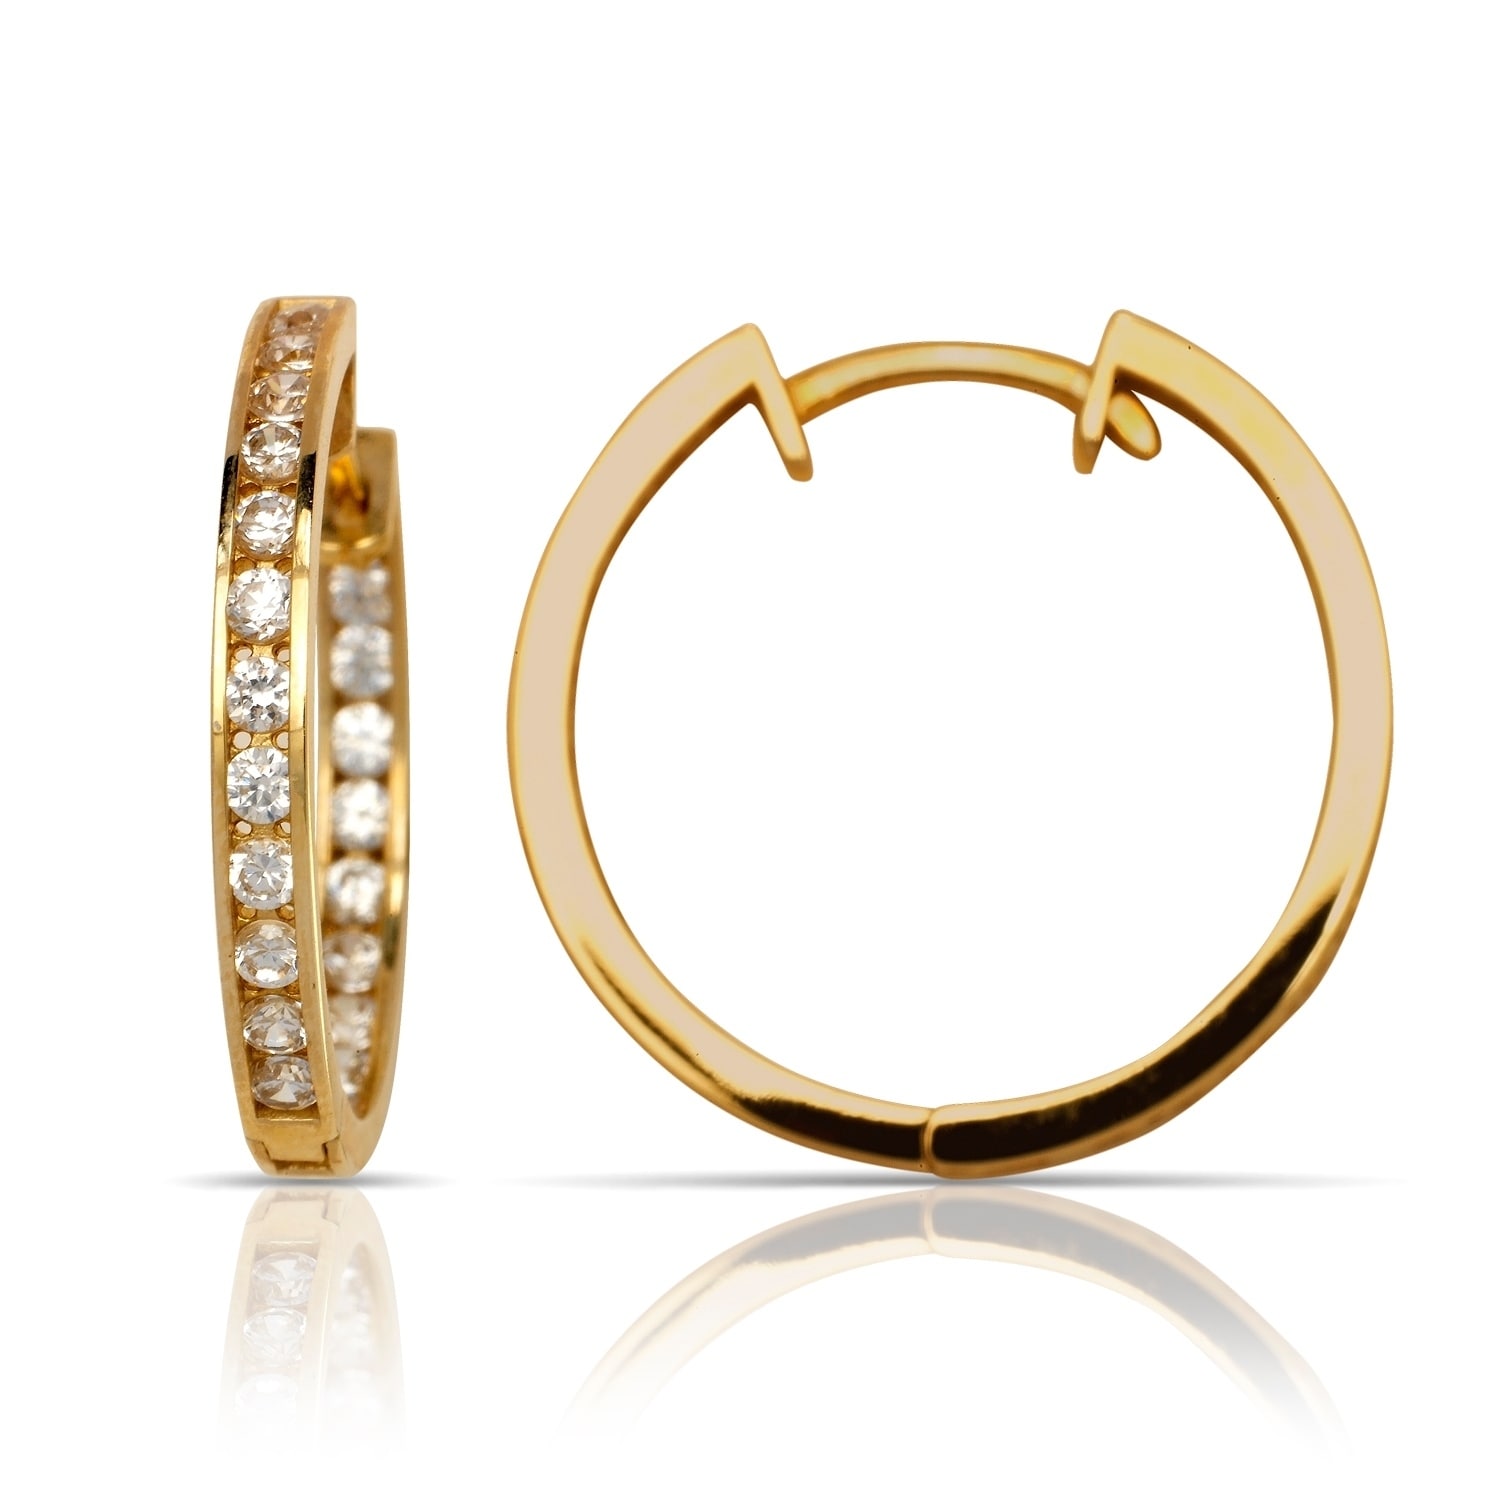 3 Different Size Available 14k REAL Yellow Gold 5mm Thickness CZ Channel Set Hoop Huggie Earrings